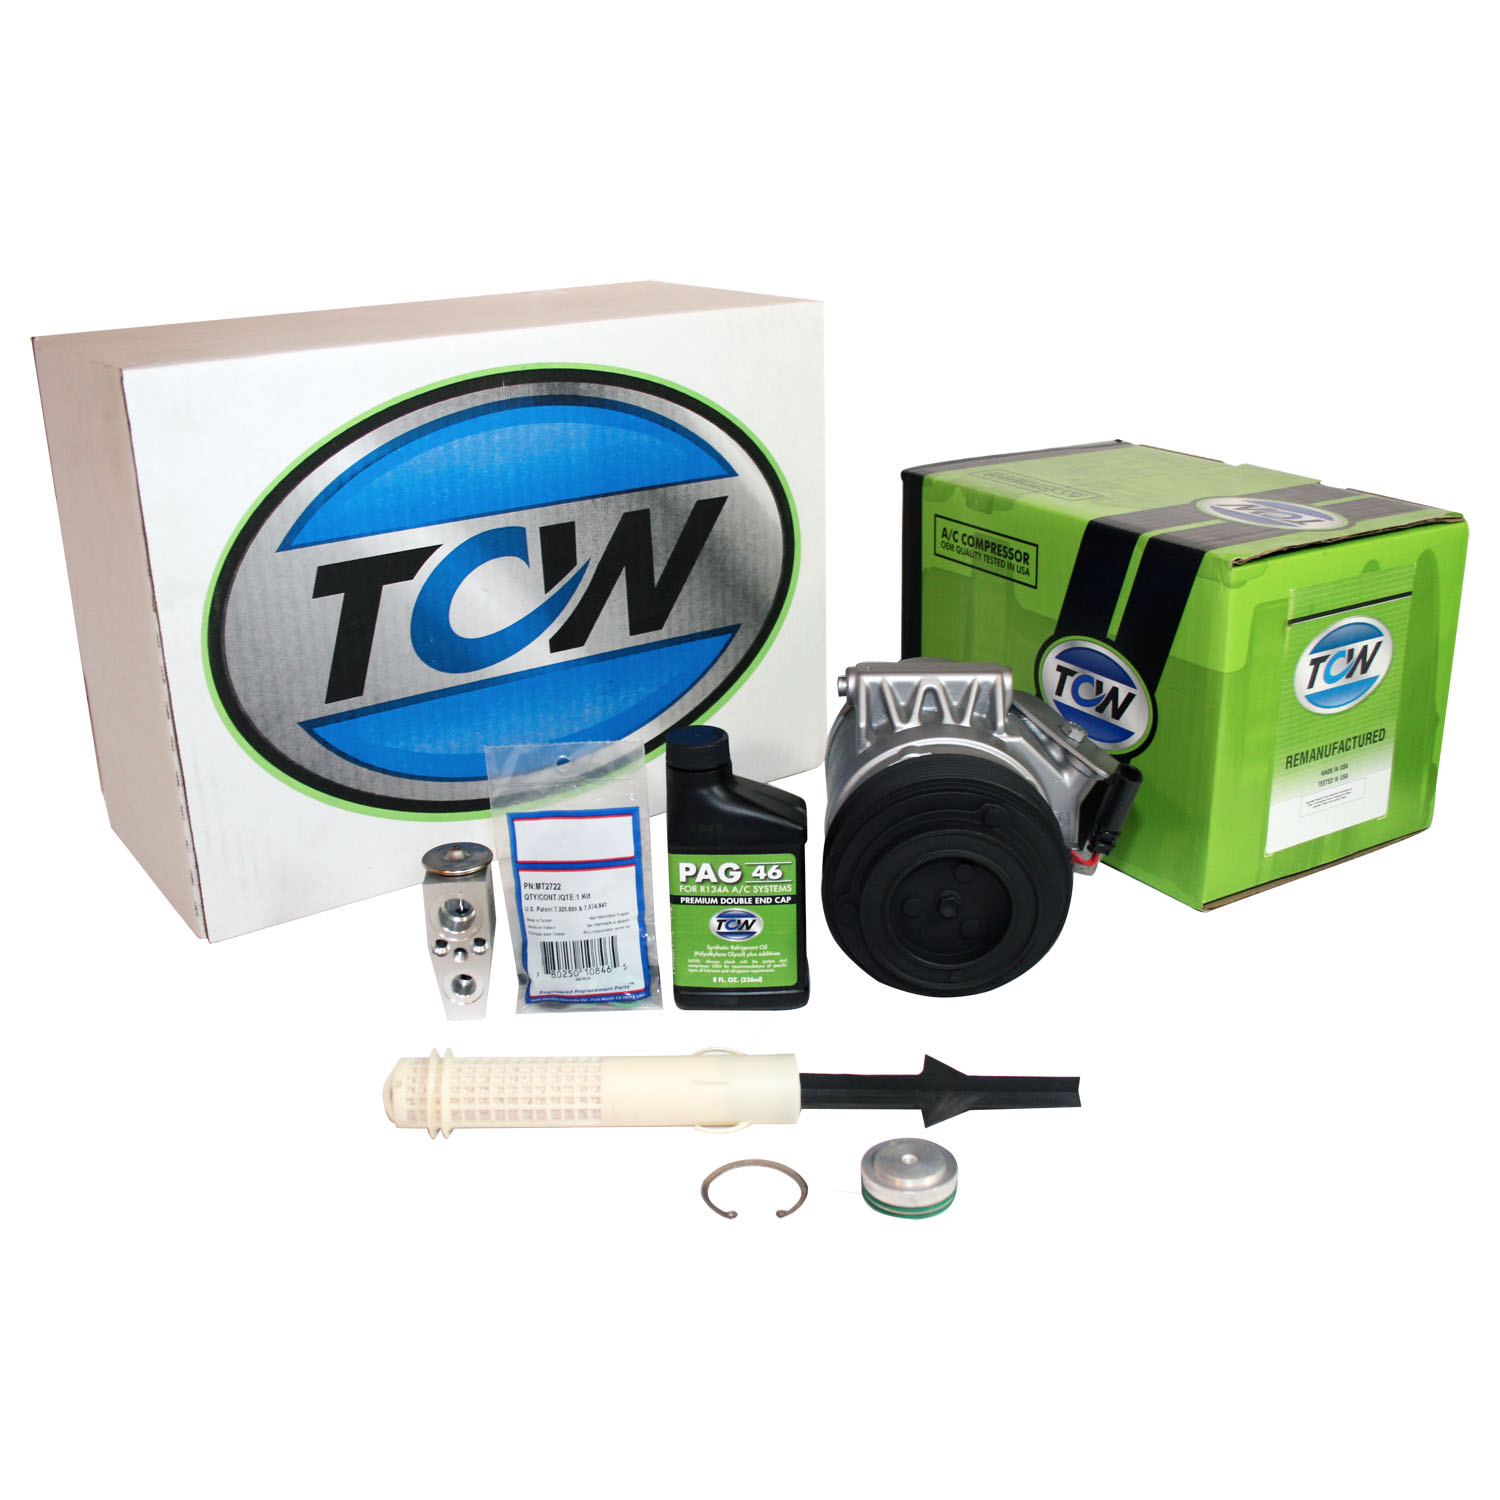 TCW Vehicle A/C Kit K1000463R Remanufactured